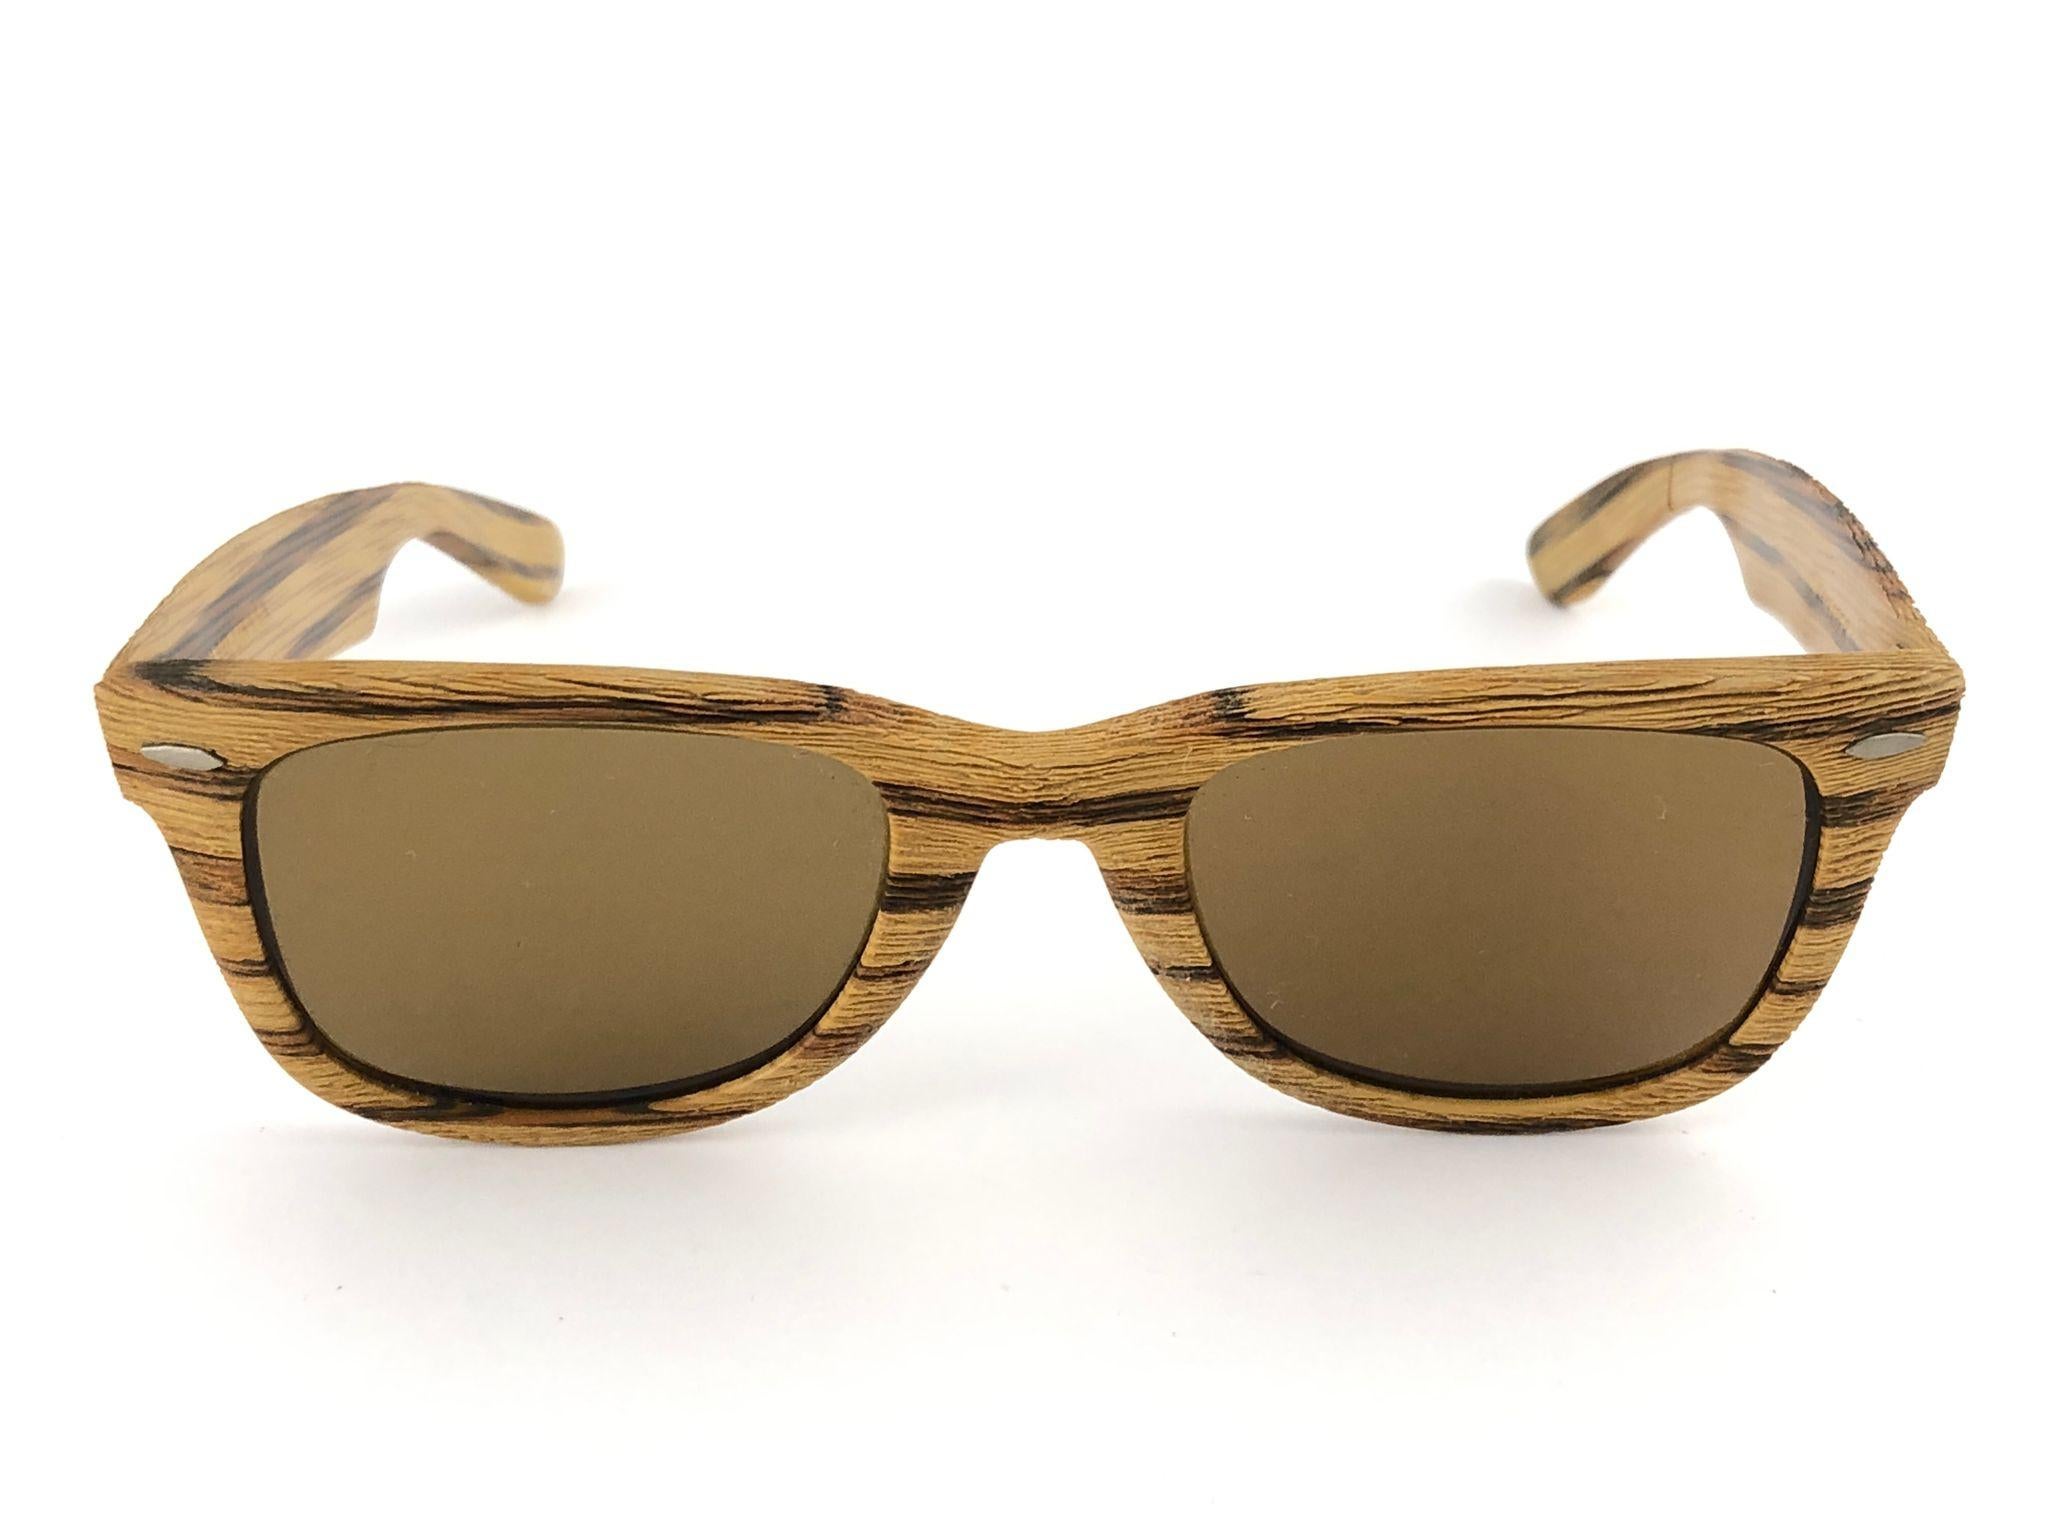 New and Rare collectors item the ultra rare edition of the classic Wayfarer: The Woodies. 
These were made in 3 colors, from light brown to dark brown. These are Teak Wood edition. B15 Brown Lenses. 5022, The classic size. 
Frame is new but has a